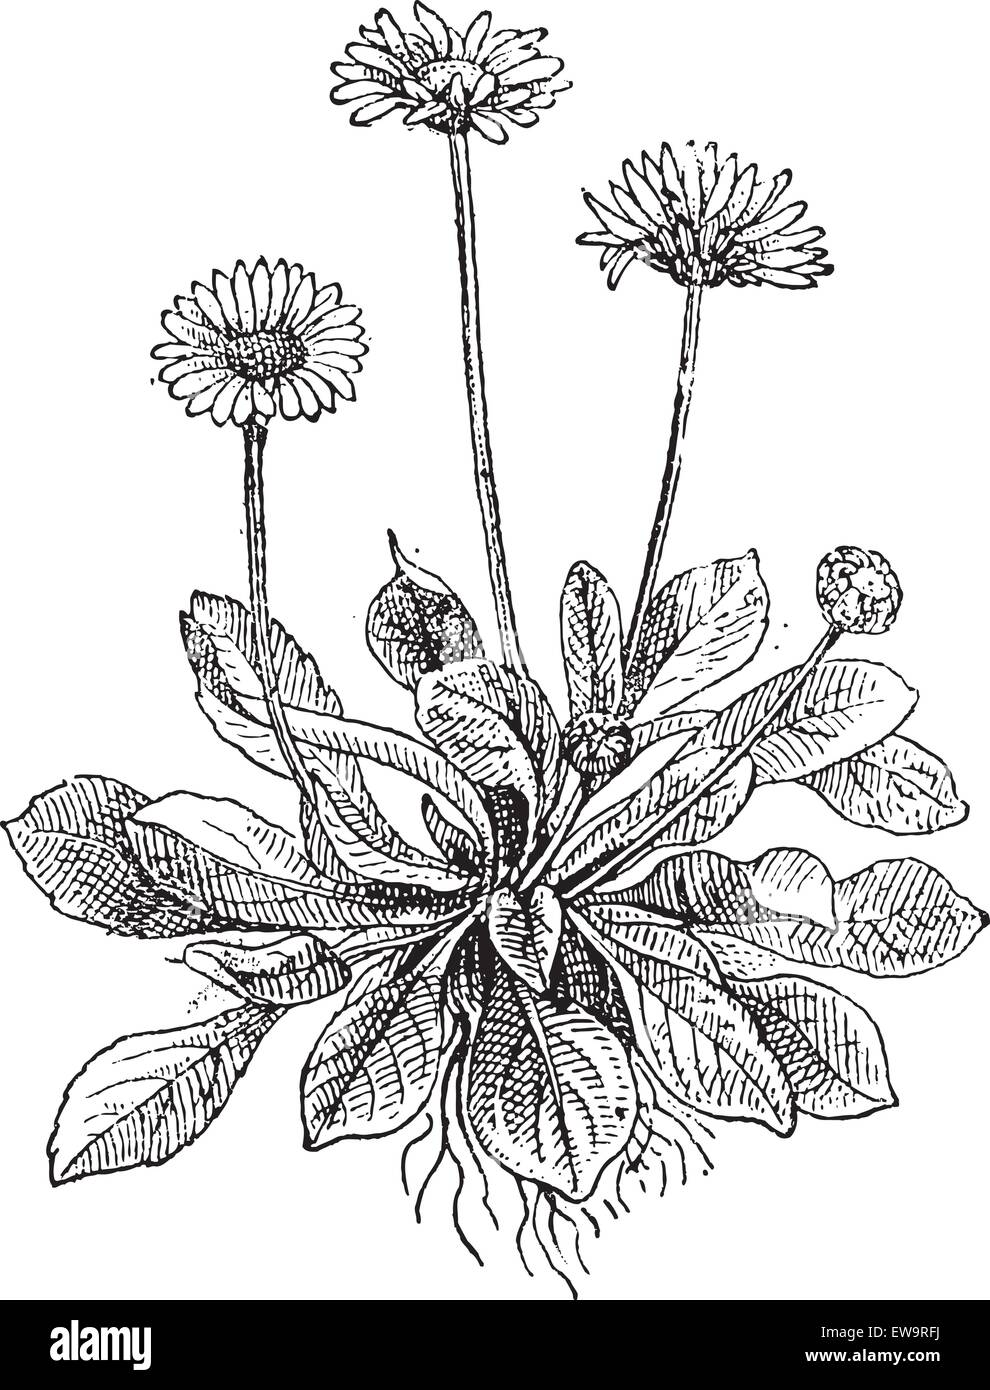 Common Daisy or Bellis perennis, showing flowers, vintage engraved illustration. Dictionary of Words and Things - Larive and Fleury - 1895 Stock Vector